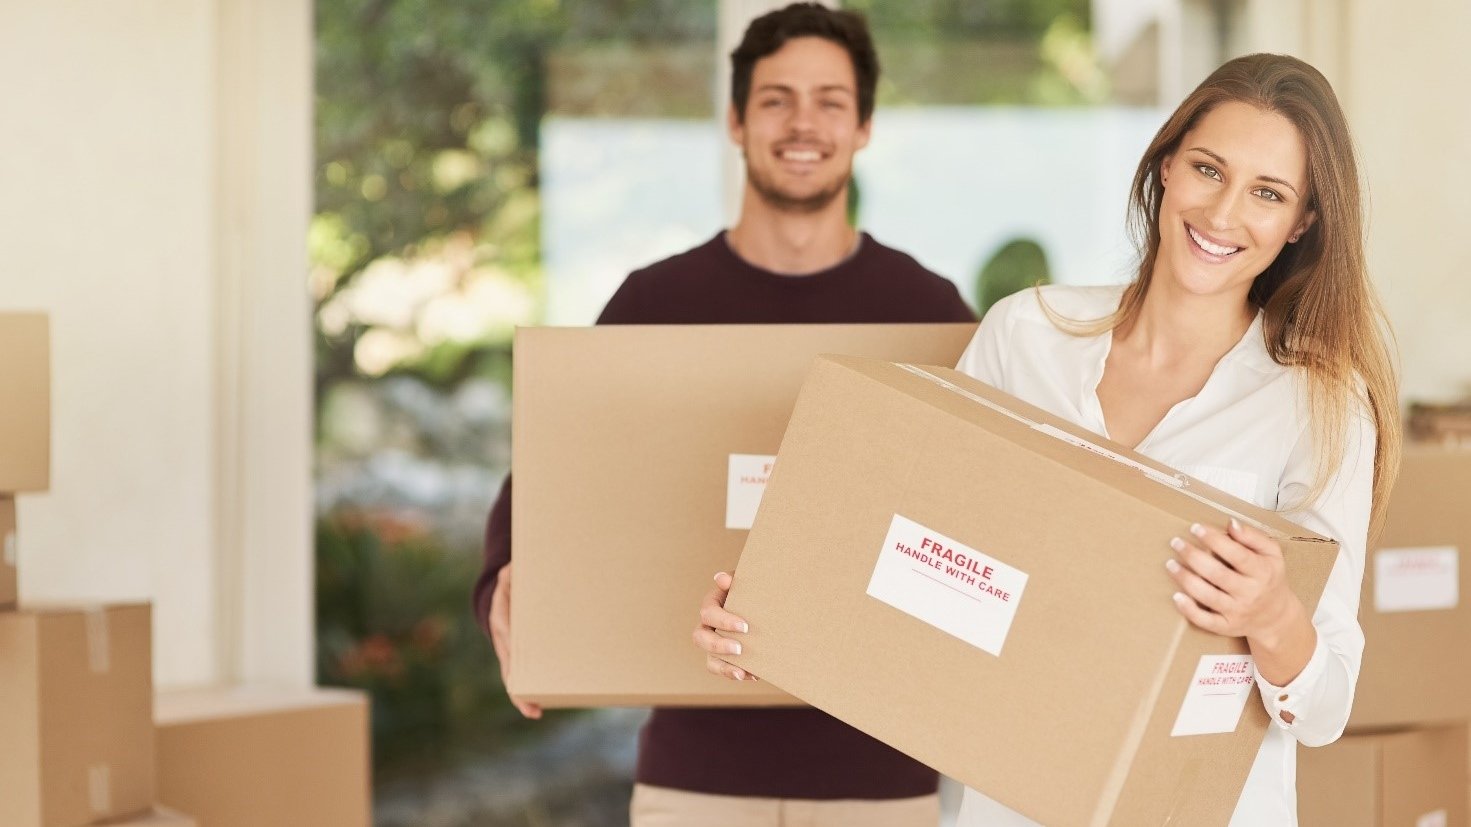 Here Are 7 Helpful Tips to Prepare for Your Move